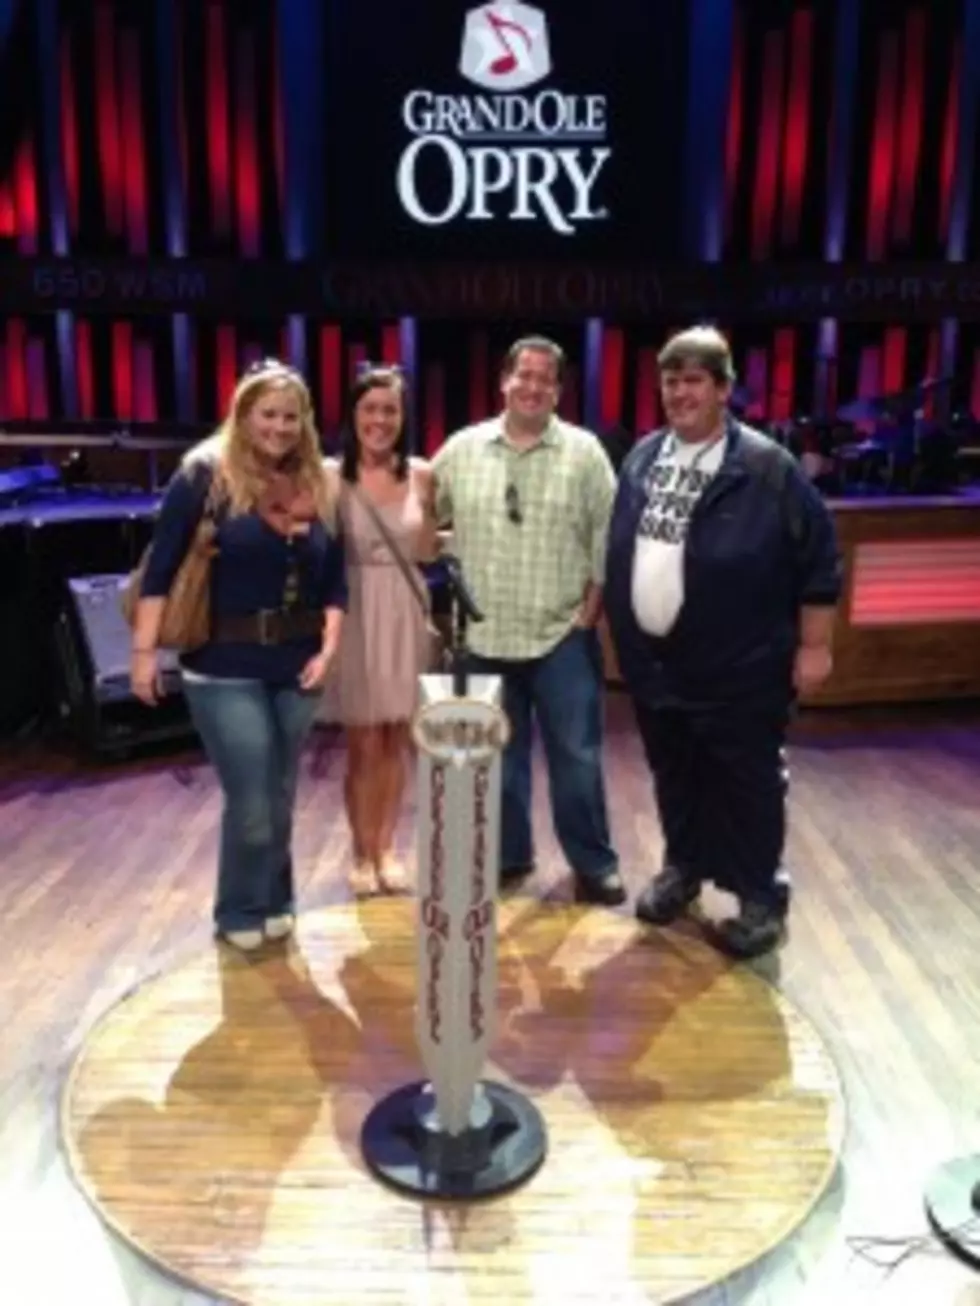 Heather&#8217;s Thoughts on Her First Time at the Grand Ole Opry